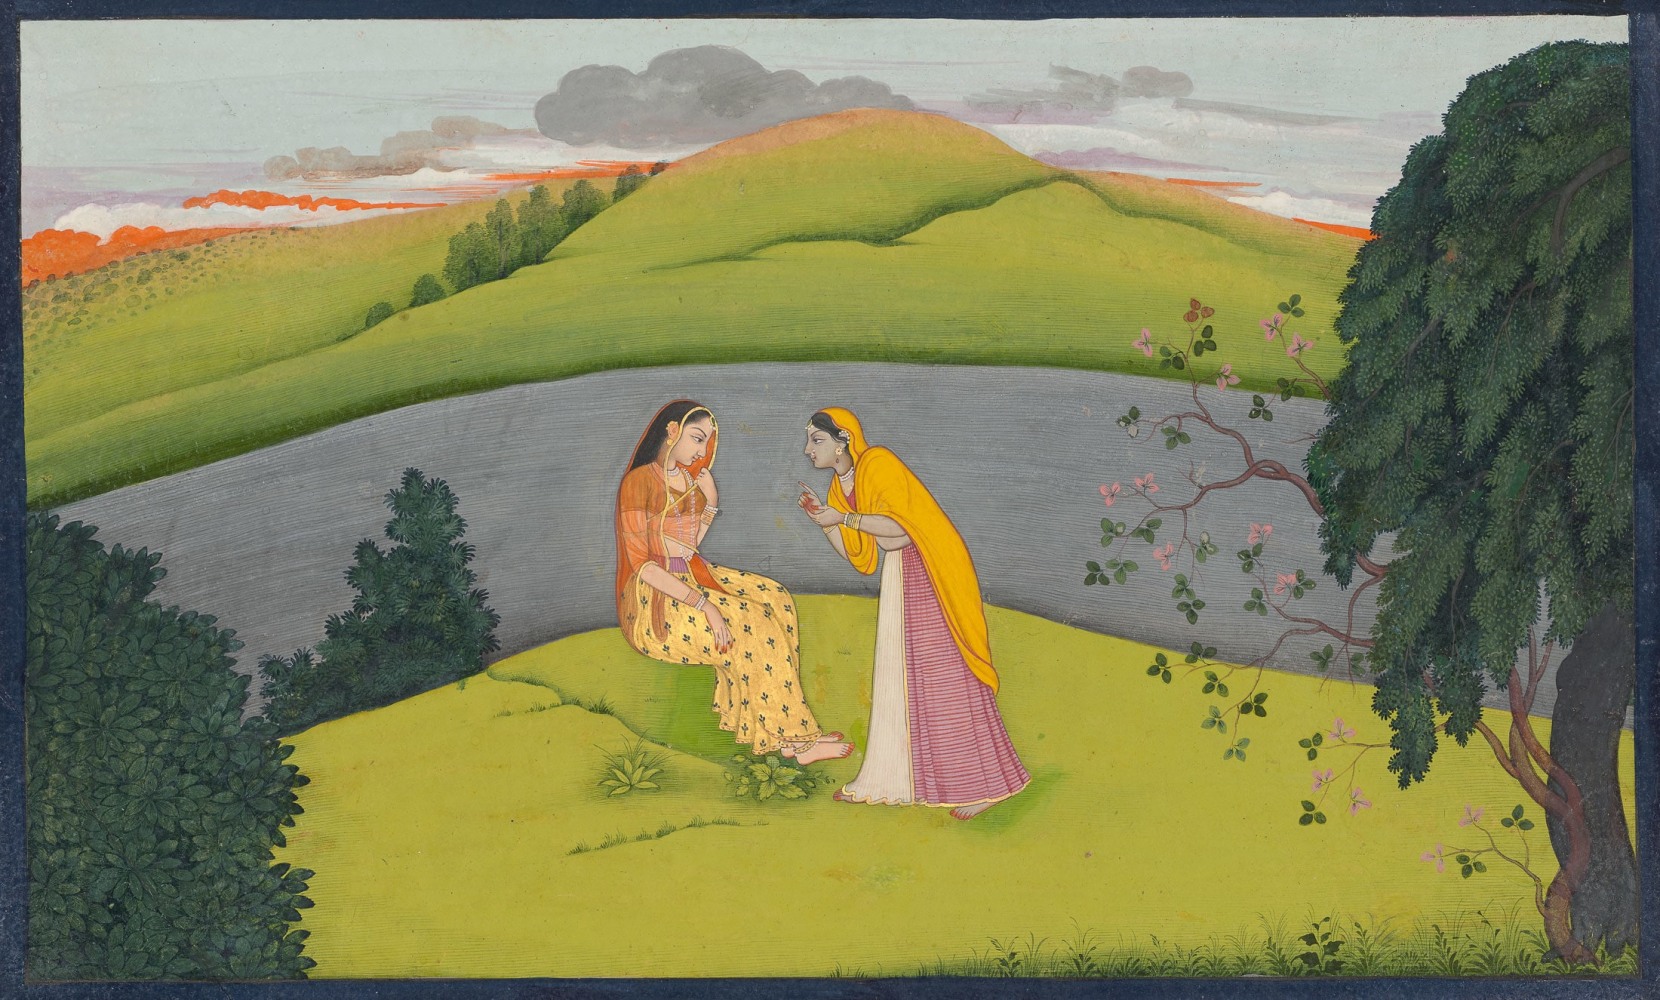 The sakhi describes Krishna&amp;rsquo;s lovelorn state to a hesitant Radha, 1765-70
Folio from the &amp;lsquo;Second Guler&amp;rsquo; or &amp;lsquo;Tehri-Garhwal&amp;rsquo; Gitagovinda
Master of the first generation after Manaku and Nainsukh of Guler
Tempera, opaque pigments on paper, with gold pigment
Folio: 6 7/8 x 10 7/8 inches (17.6 x 27.5 cm)
Painting: 6 1/8 x 10 1/8 inches (15.3 x 25.7 cm)